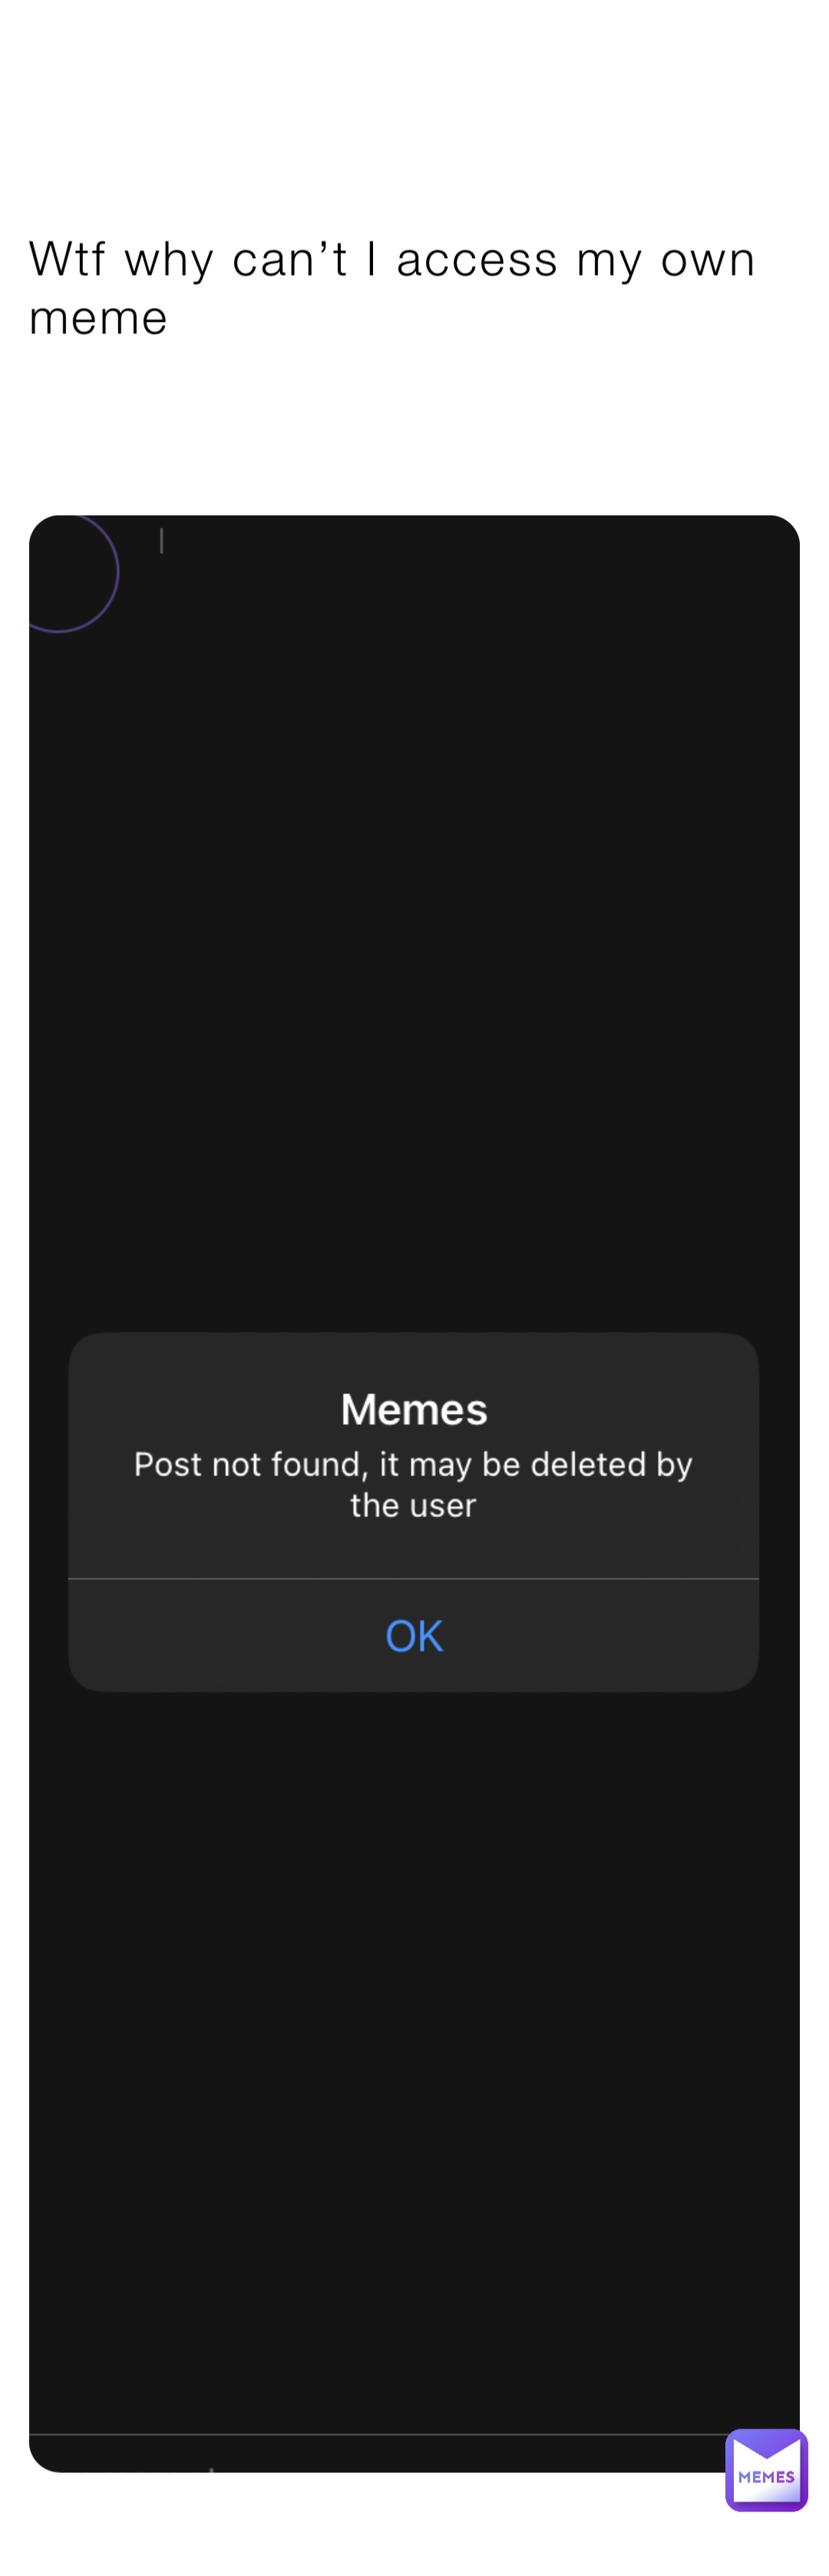 Wtf why can’t I access my own meme